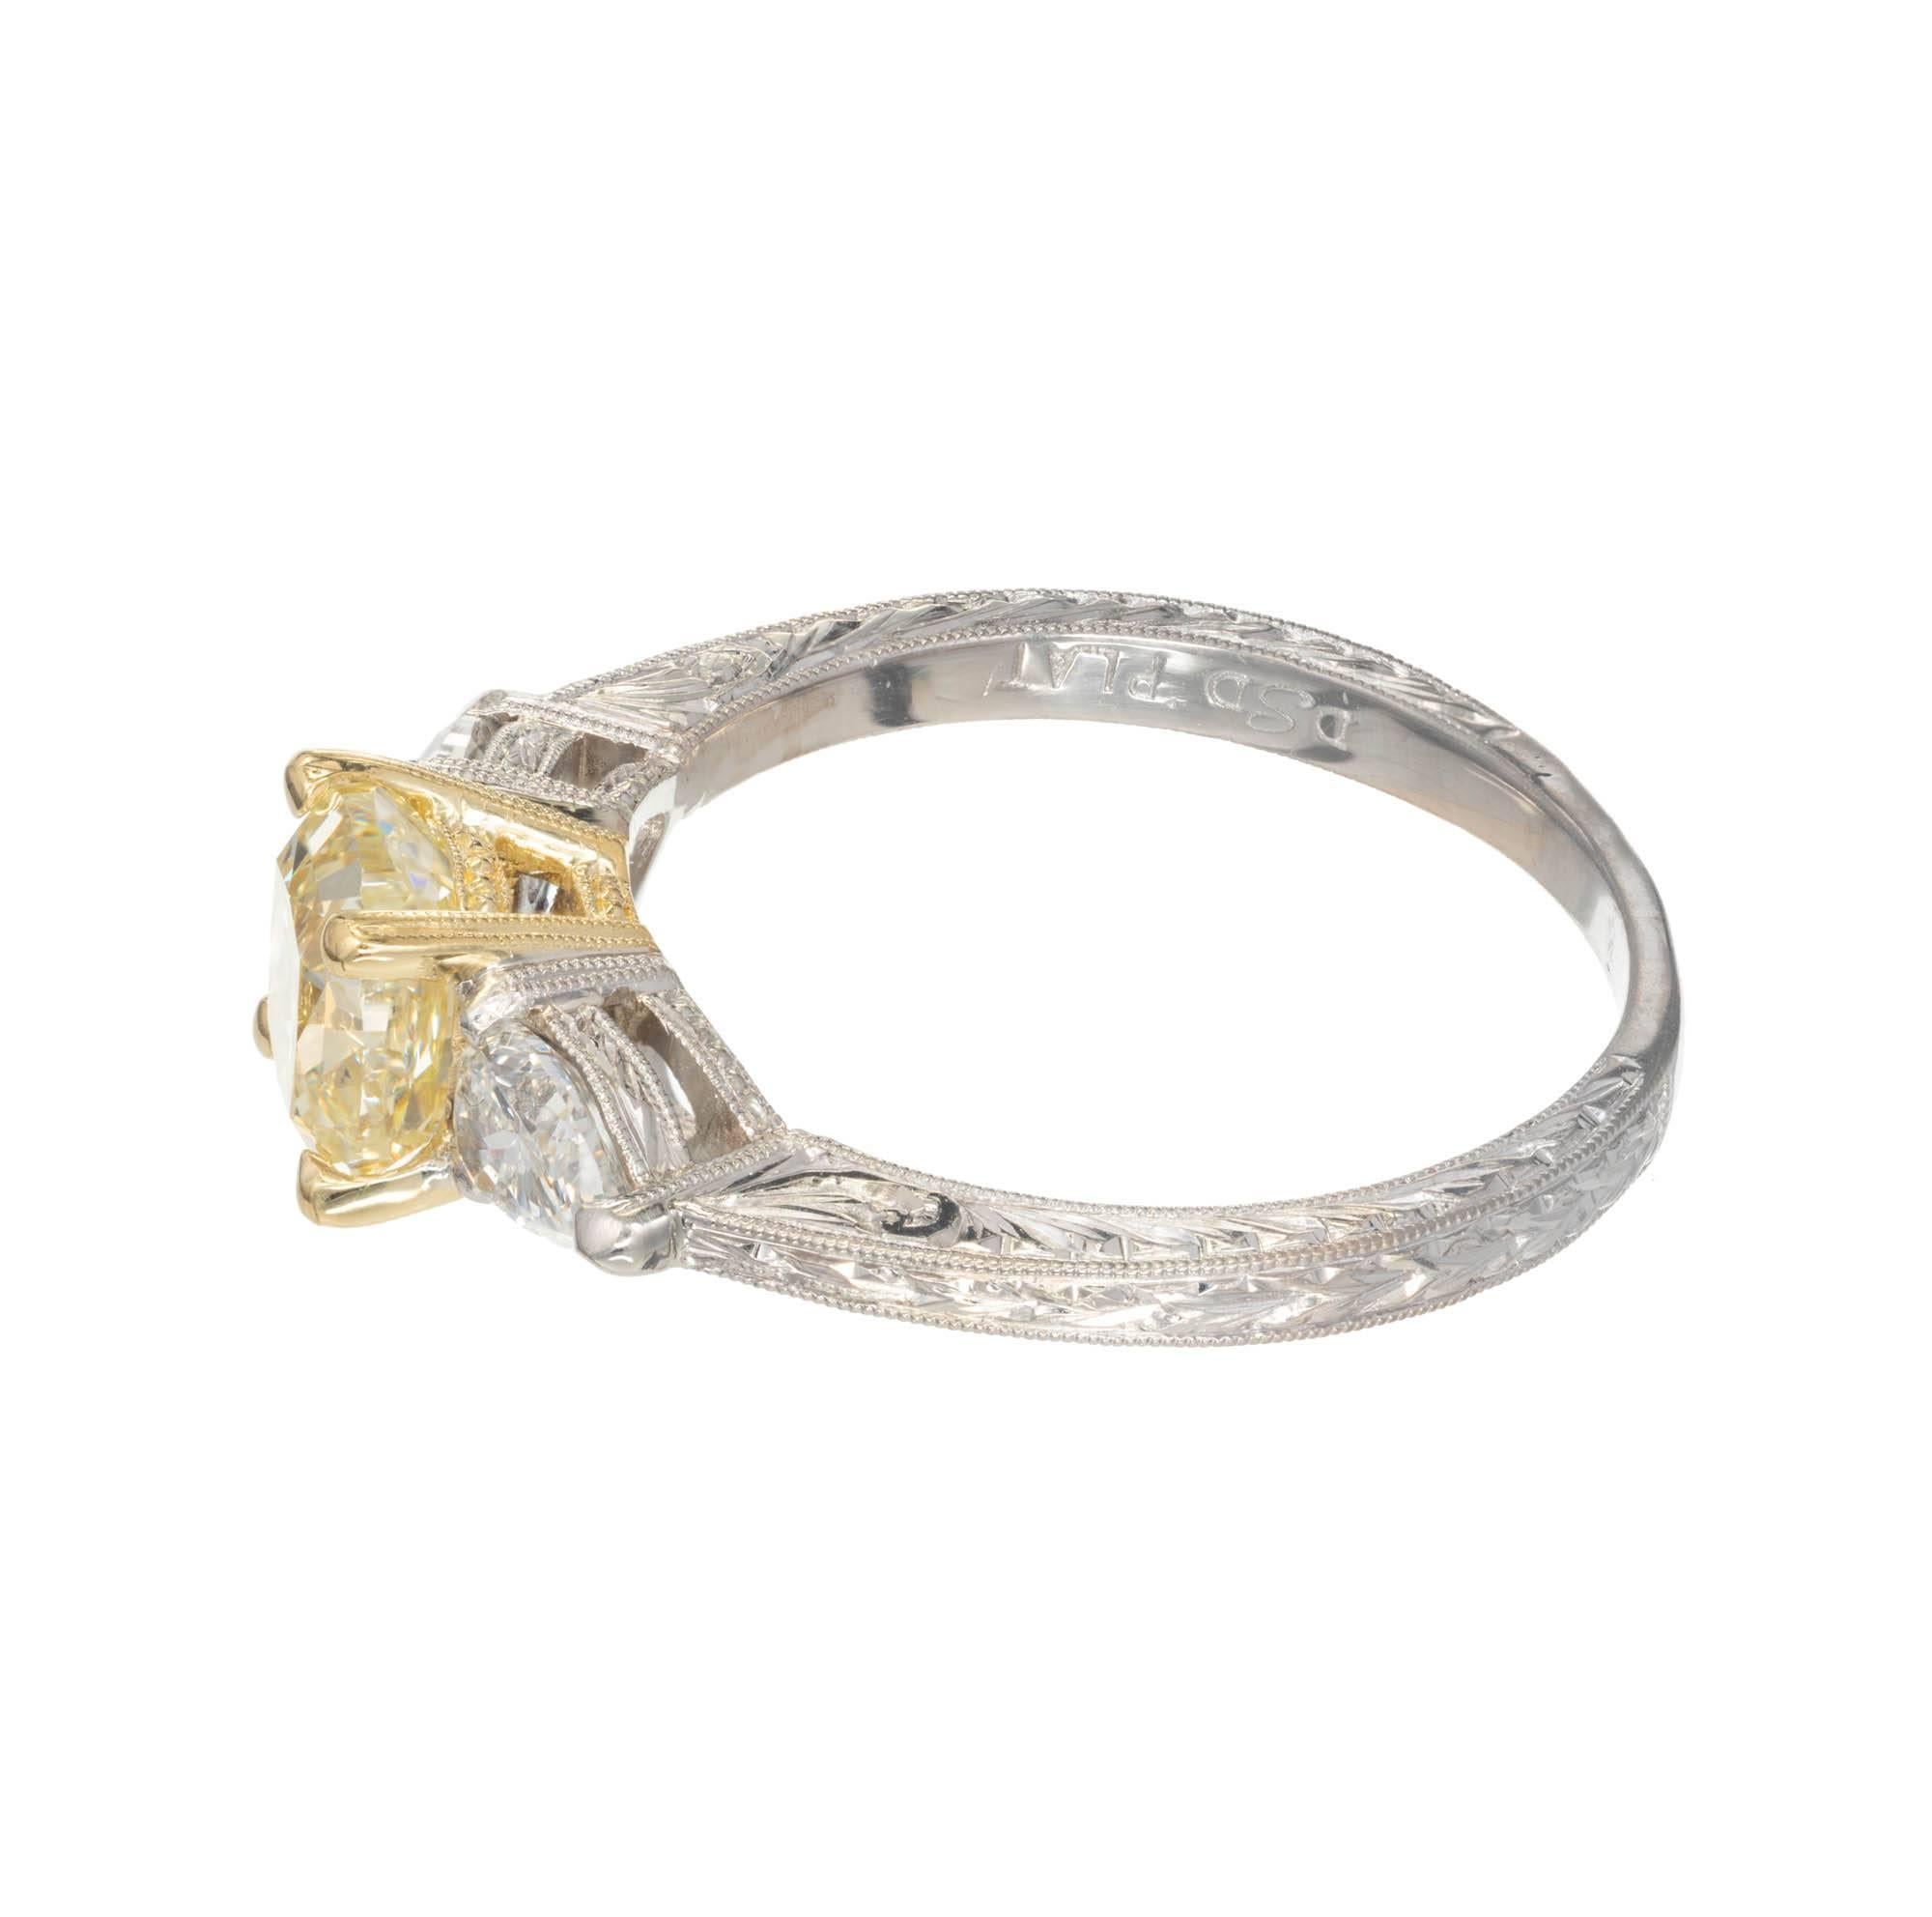 GIA Certified 1.26 Carat Yellow Sapphire Diamond Platinum Gold Engagement Ring In Good Condition For Sale In Stamford, CT